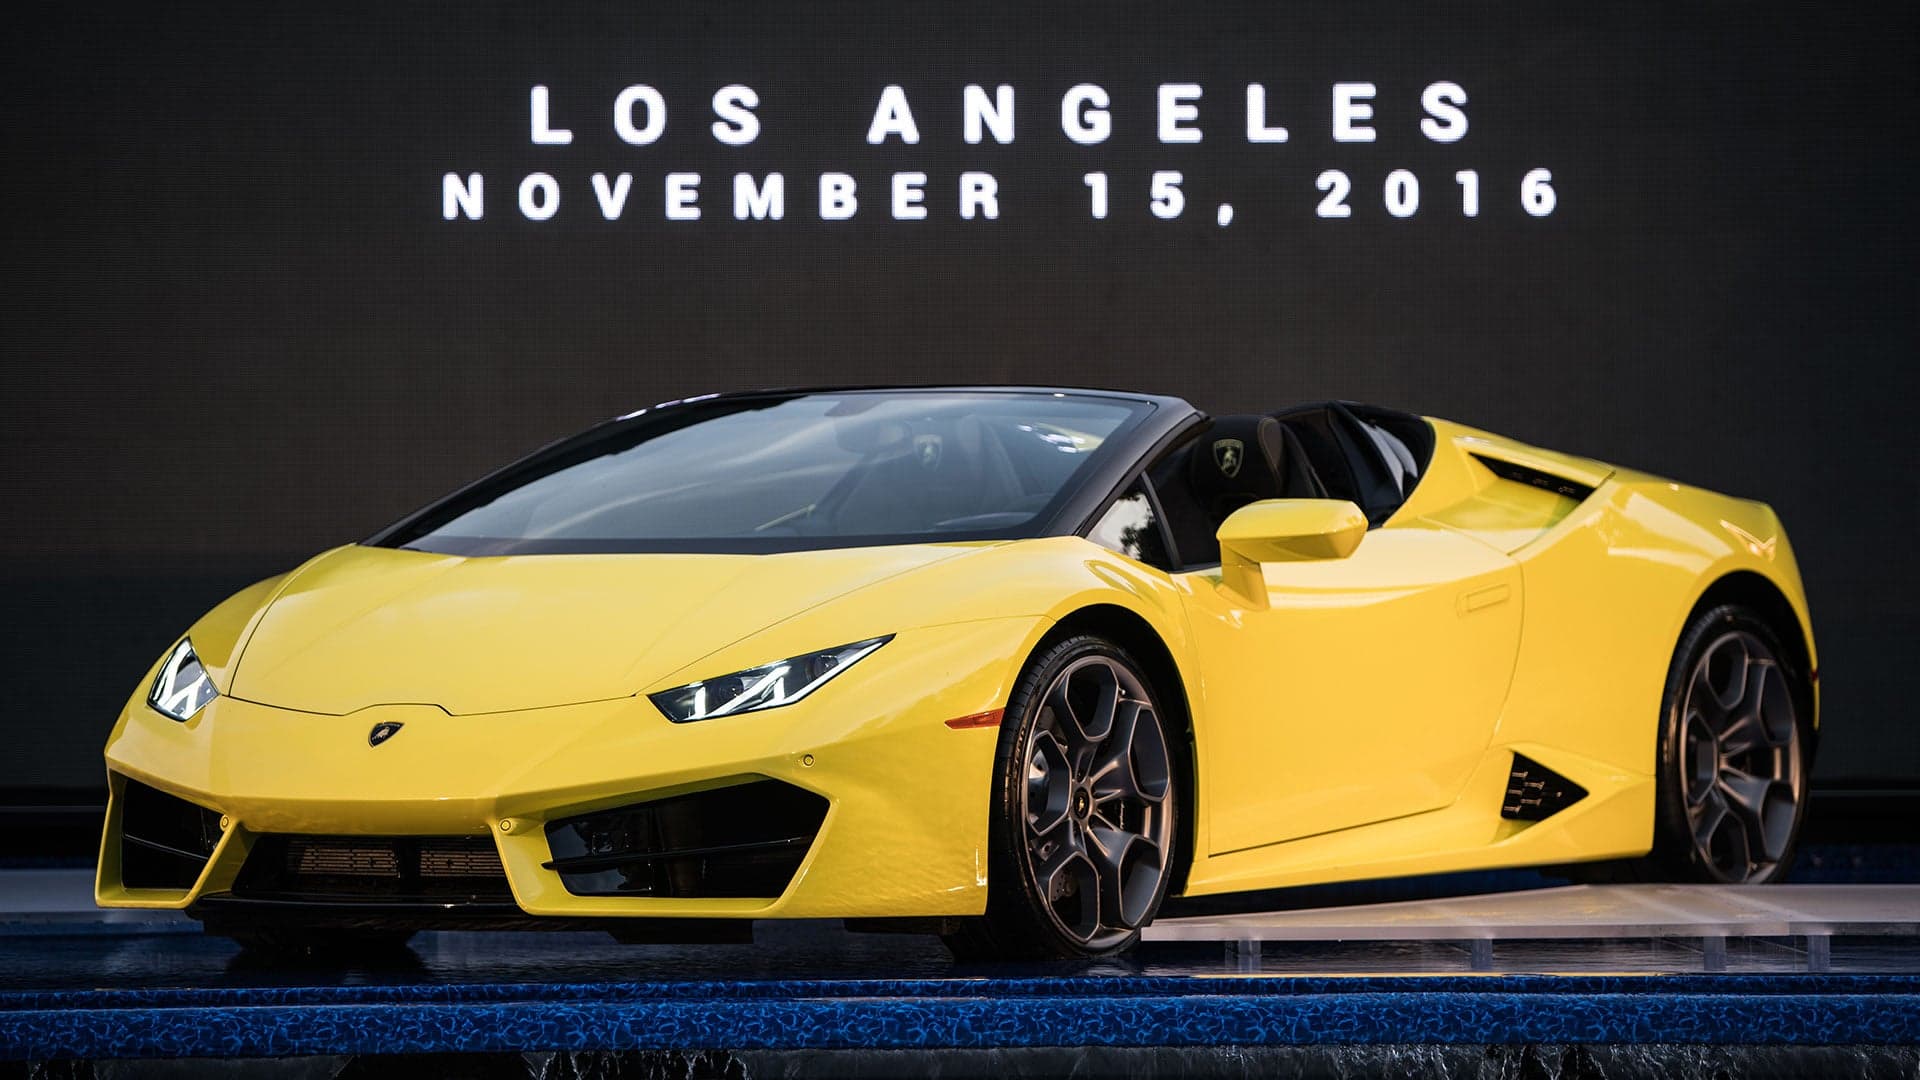 The New Lamborghini Huracan Spyder RWD Is the Most Emotional Huracan Yet